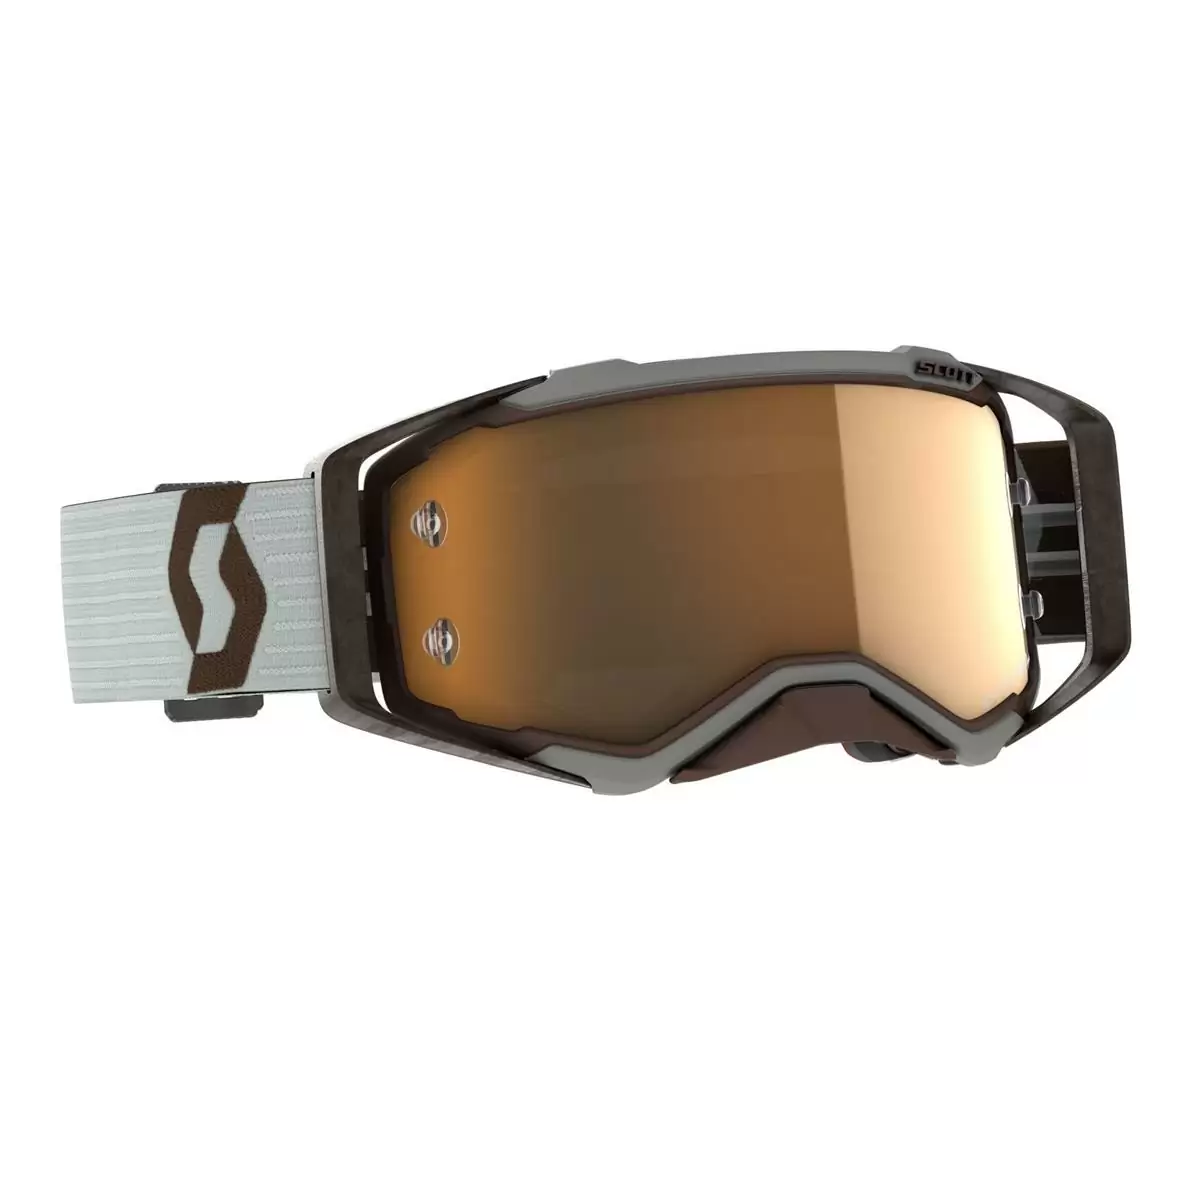 Prospect Goggle Grey/Brown Gold Chrome Works Lens - image